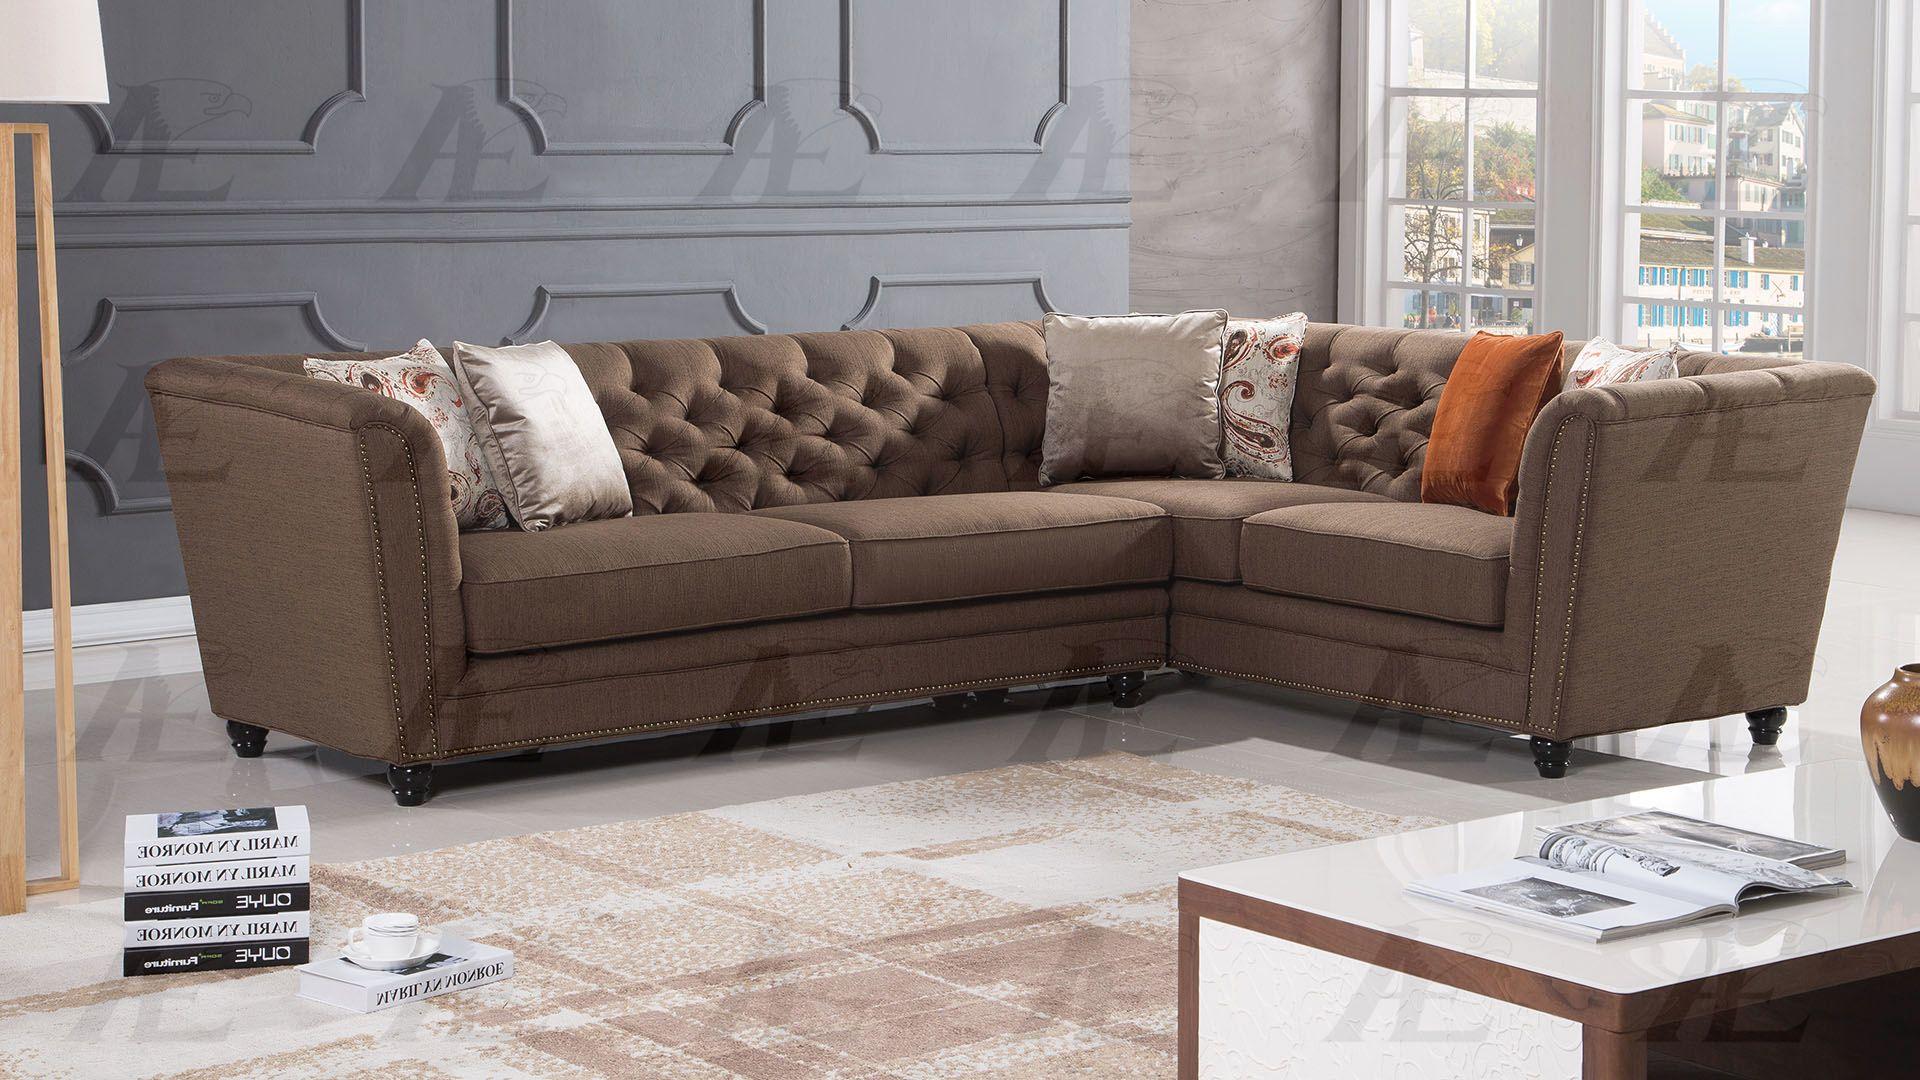 

    
American Eagle Furniture AE-L2219-BR Brown Fabric Tufted Sectional Sofa Living Room Set Left Hand Chase 2Pcs
